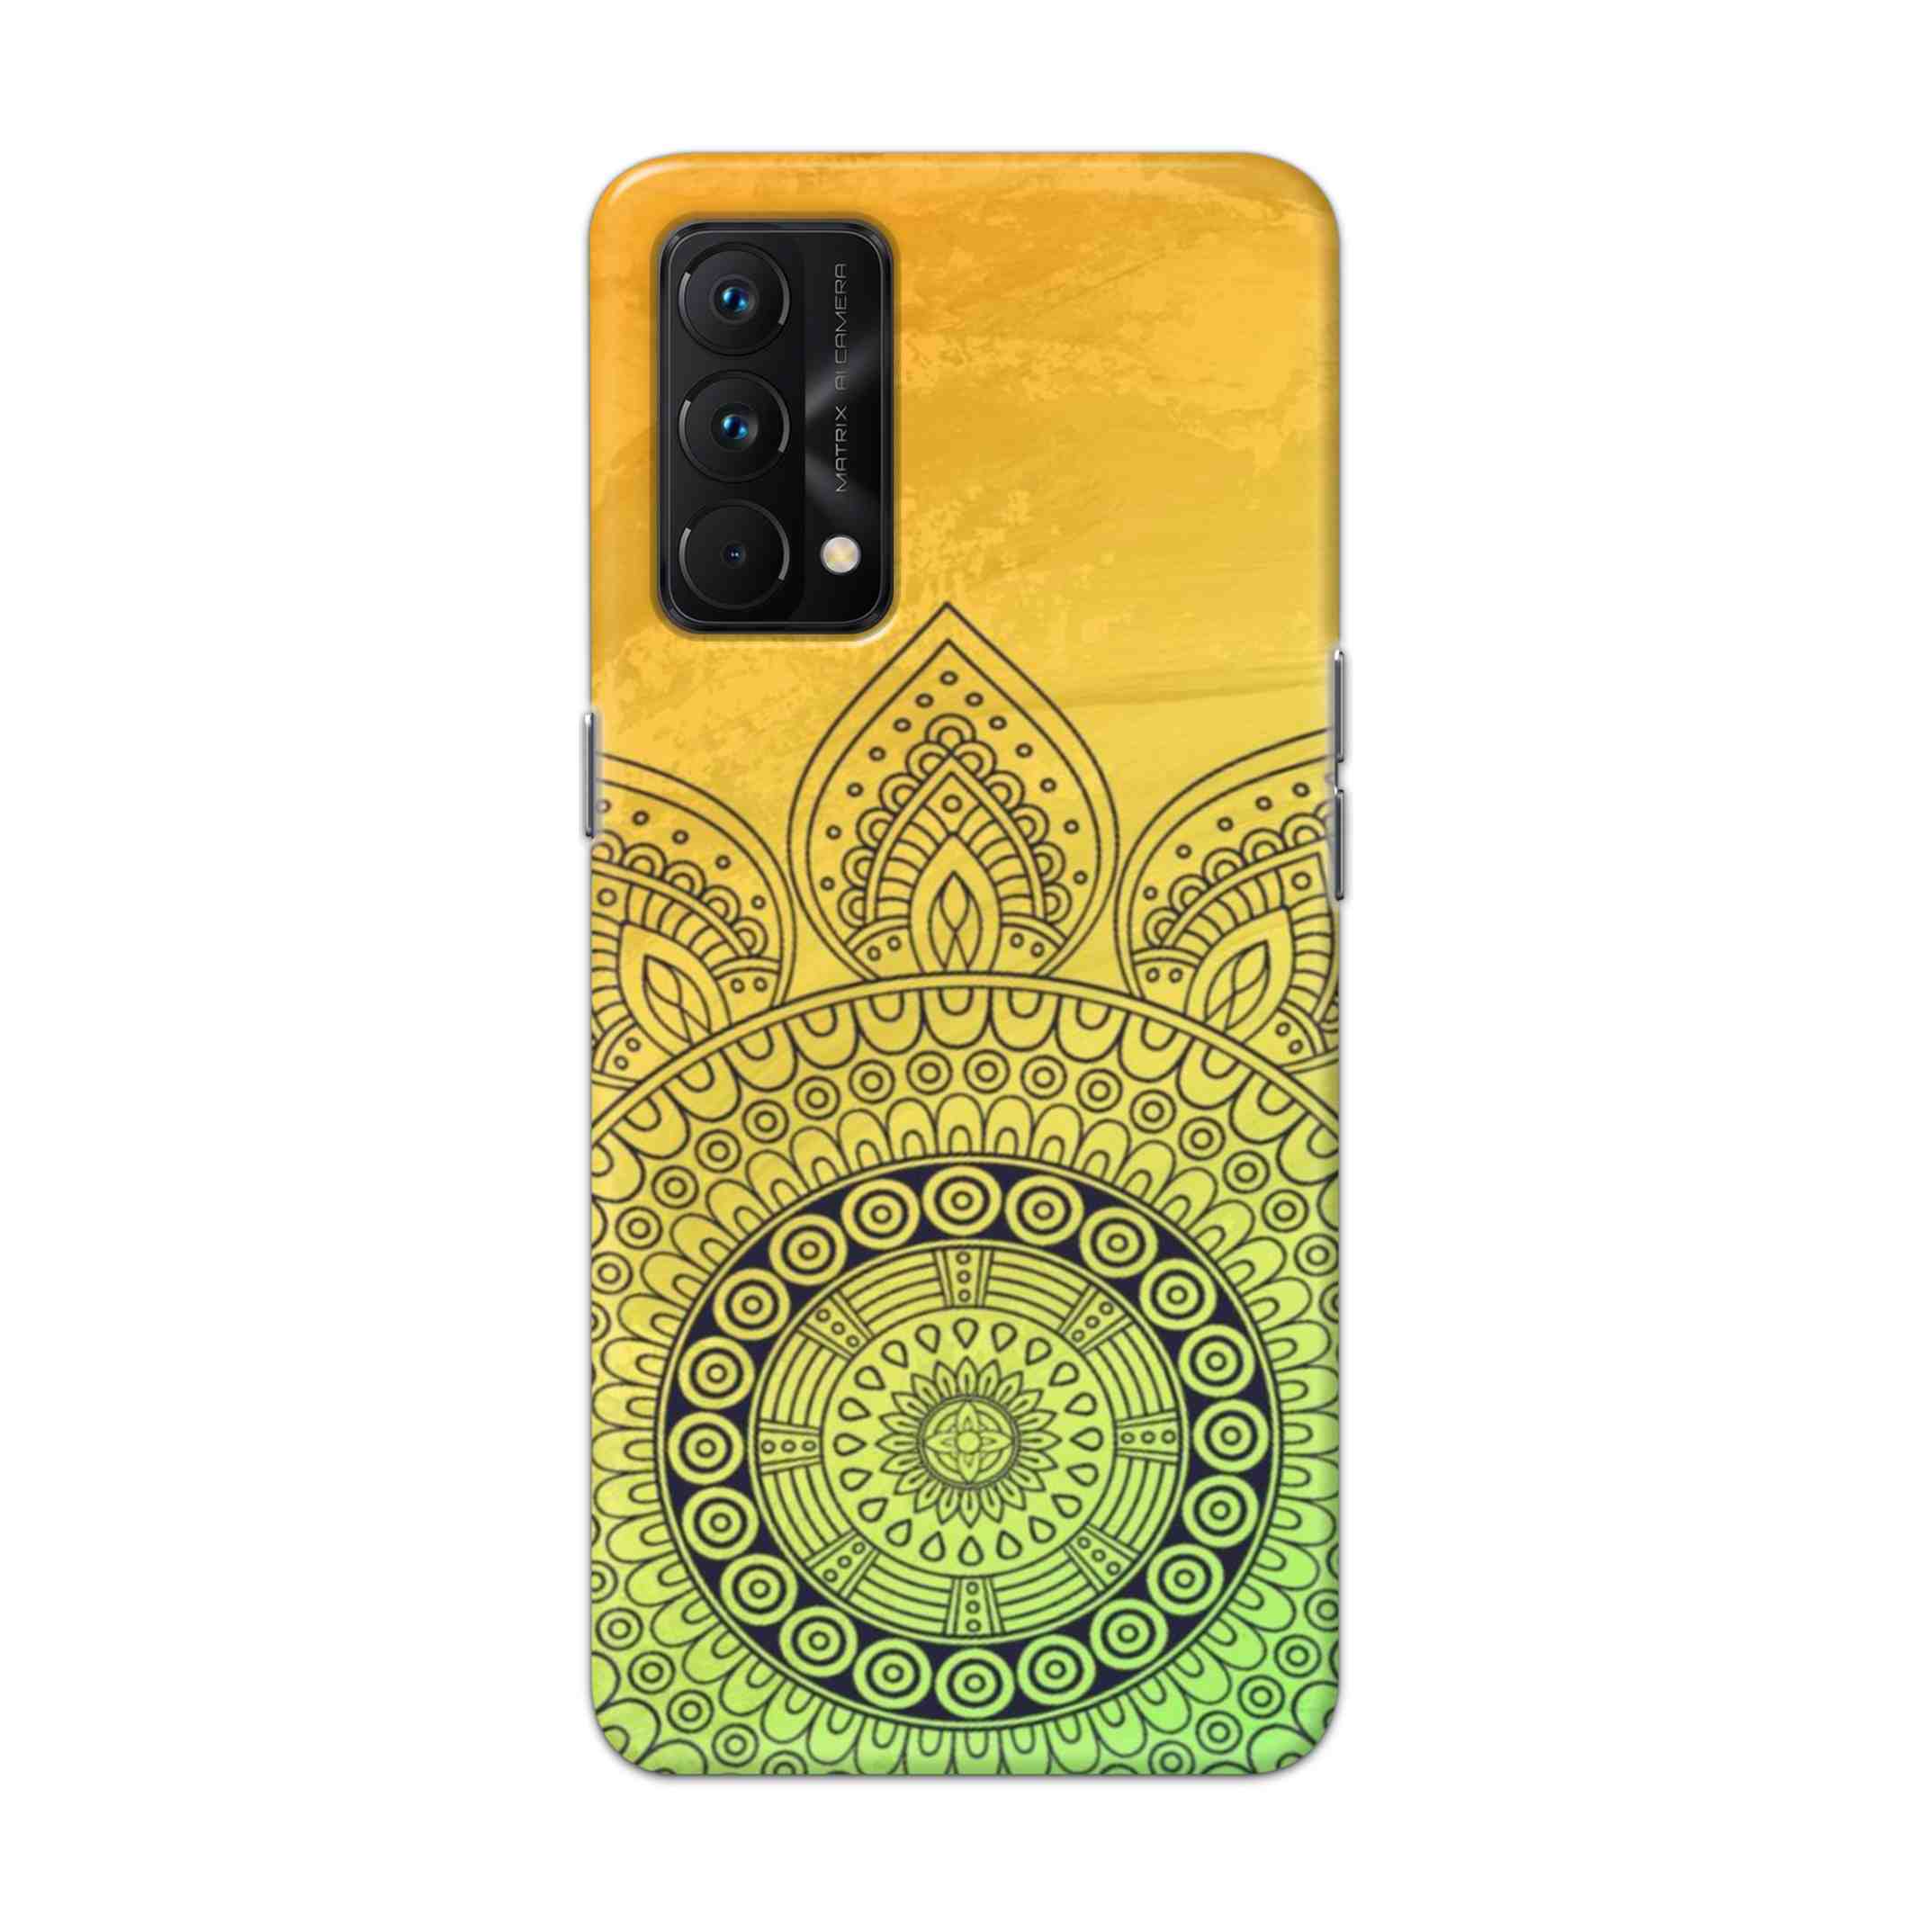 Buy Yellow Rangoli Hard Back Mobile Phone Case Cover For Realme GT Master Online